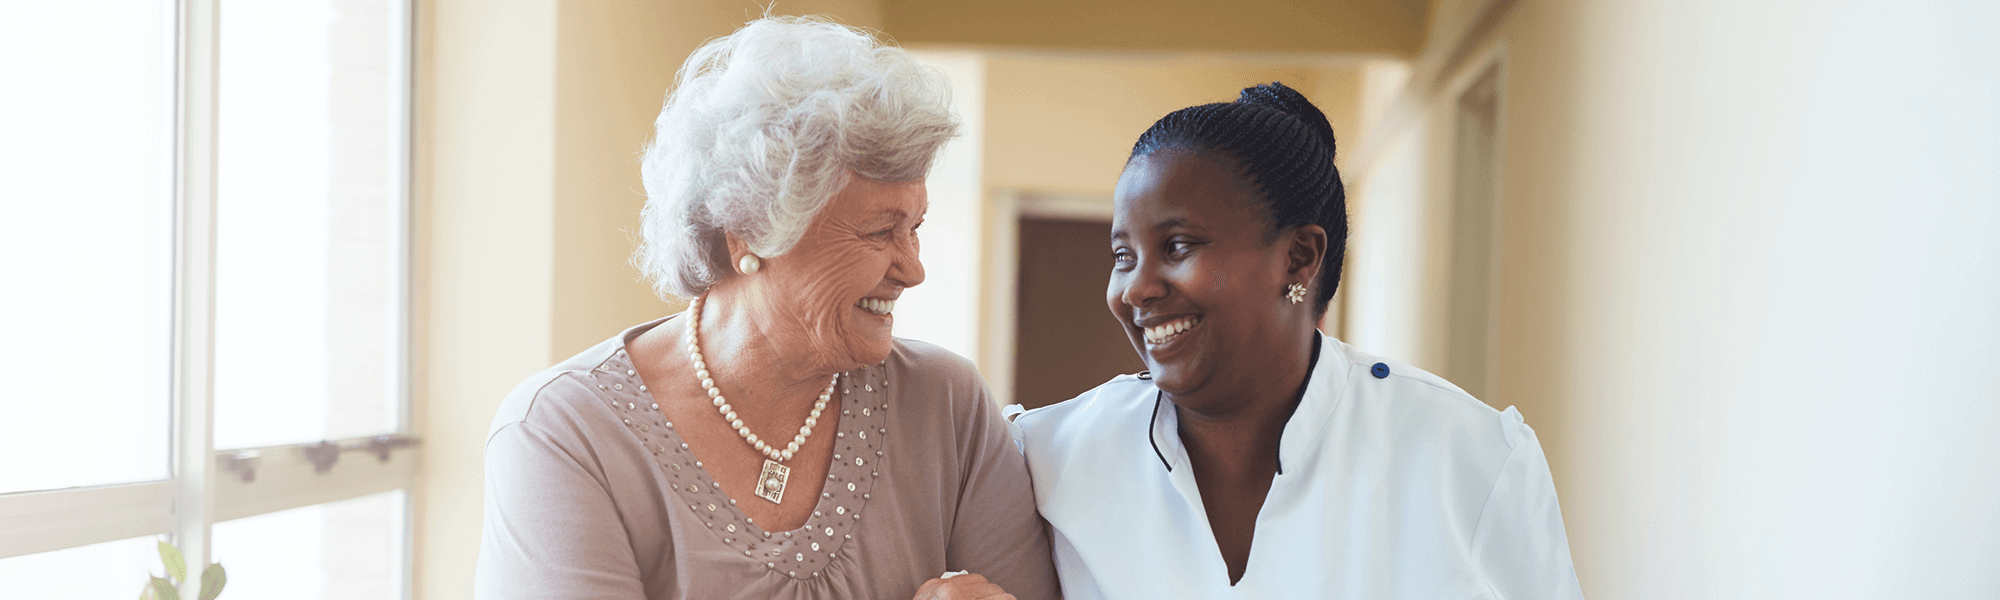 Patient and nurse smiling together